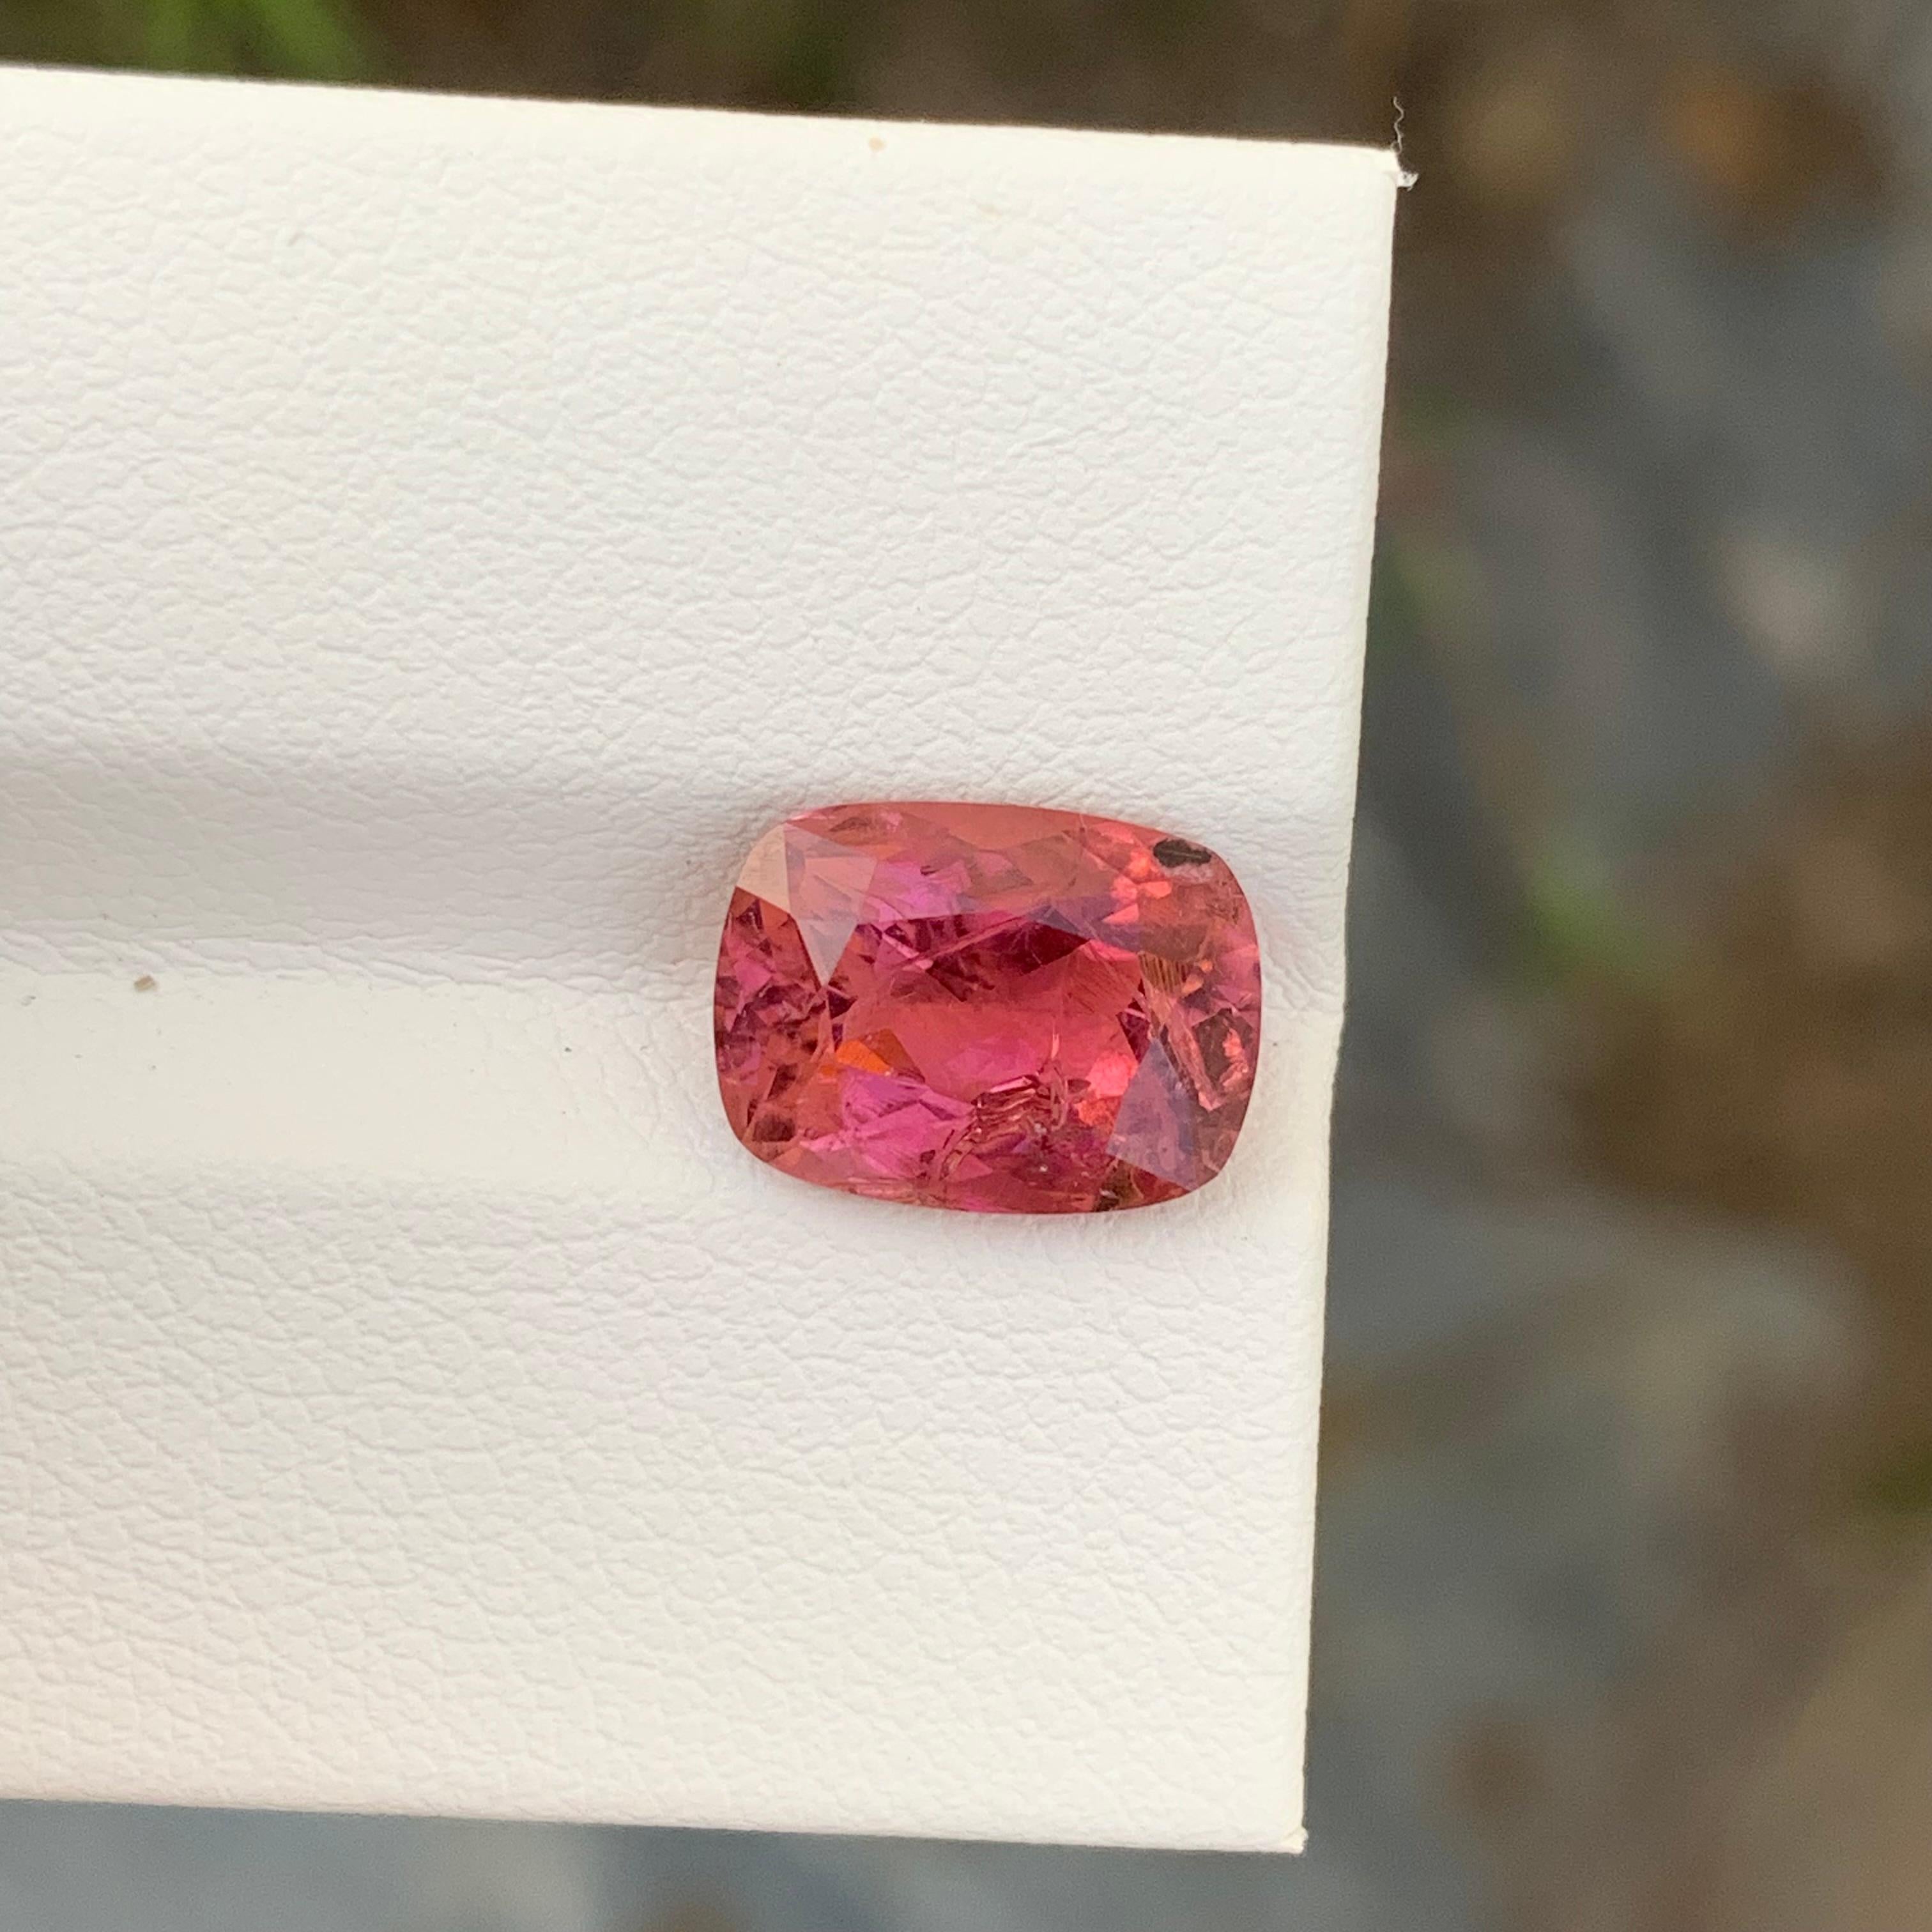 Loose Rubellite Tourmaline

Weight: 3.20 Carats
Dimension: 10.7 x 8 x 5.1 Mm
Origin: Africa 
Shape: Cushion 
Color: Pink
Certificate: On Demand

Rubellite tourmaline, often regarded as the 